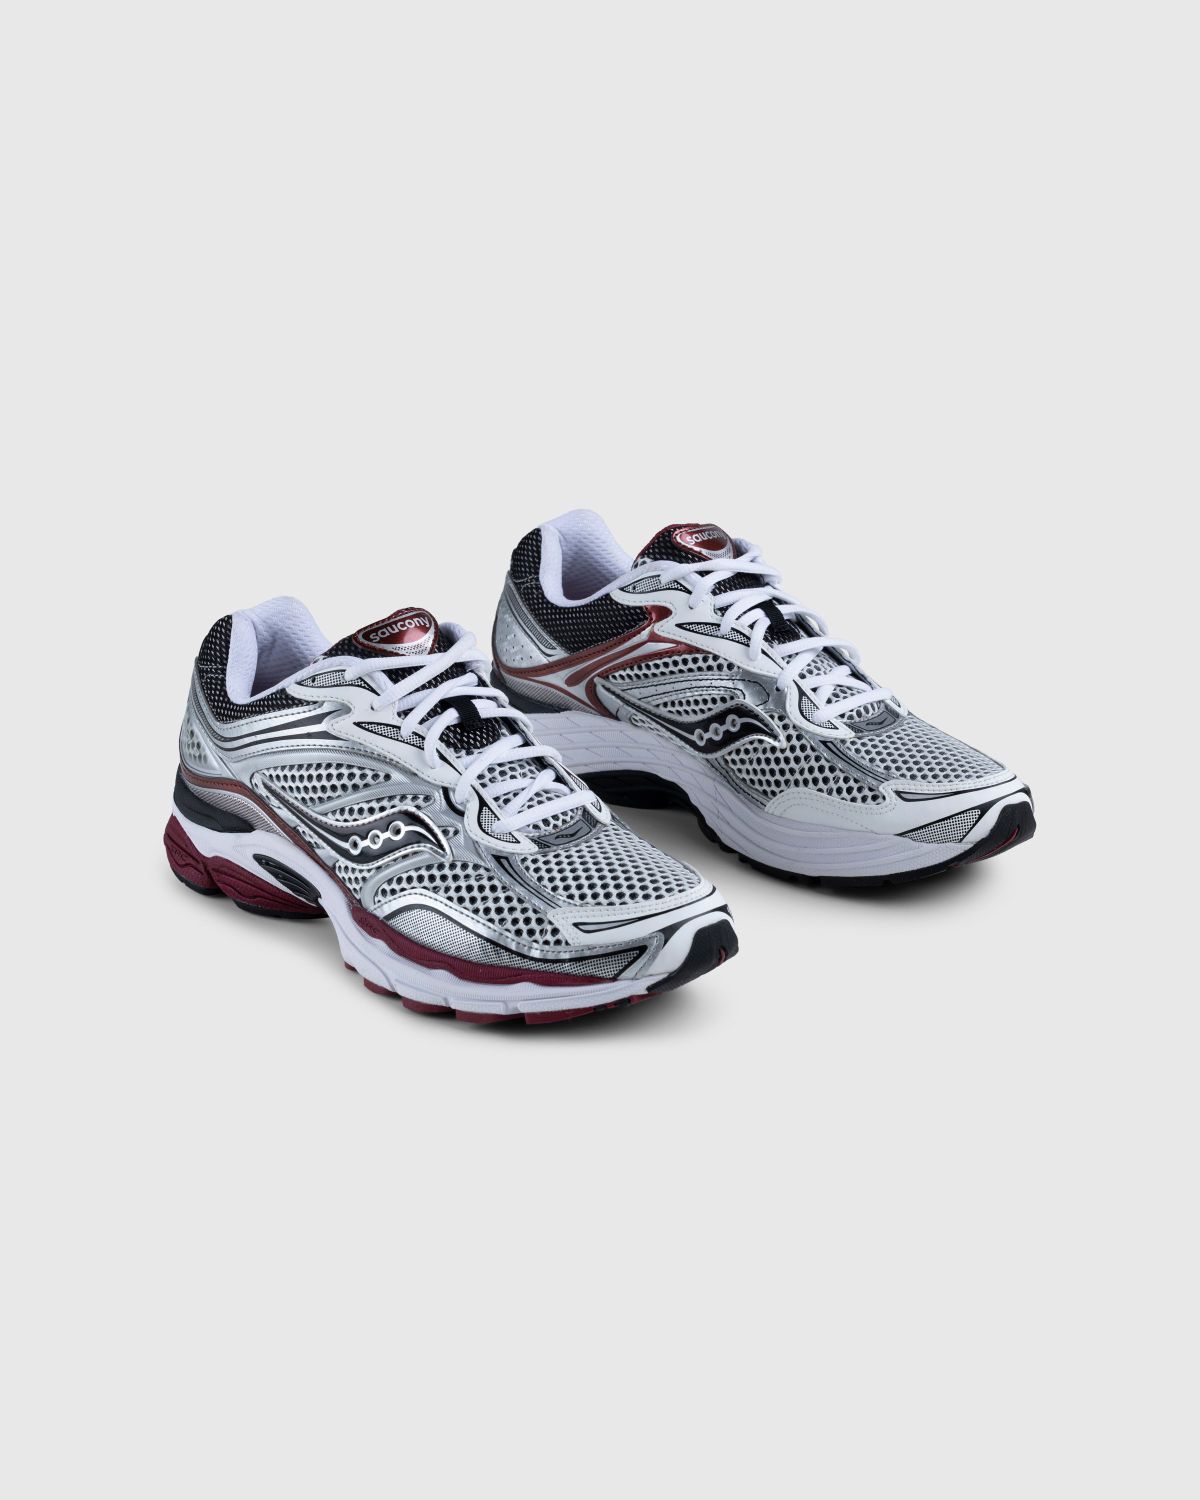 Saucony – ProGrid Omni 9 Silver/Red - Sneakers - Multi - Image 3